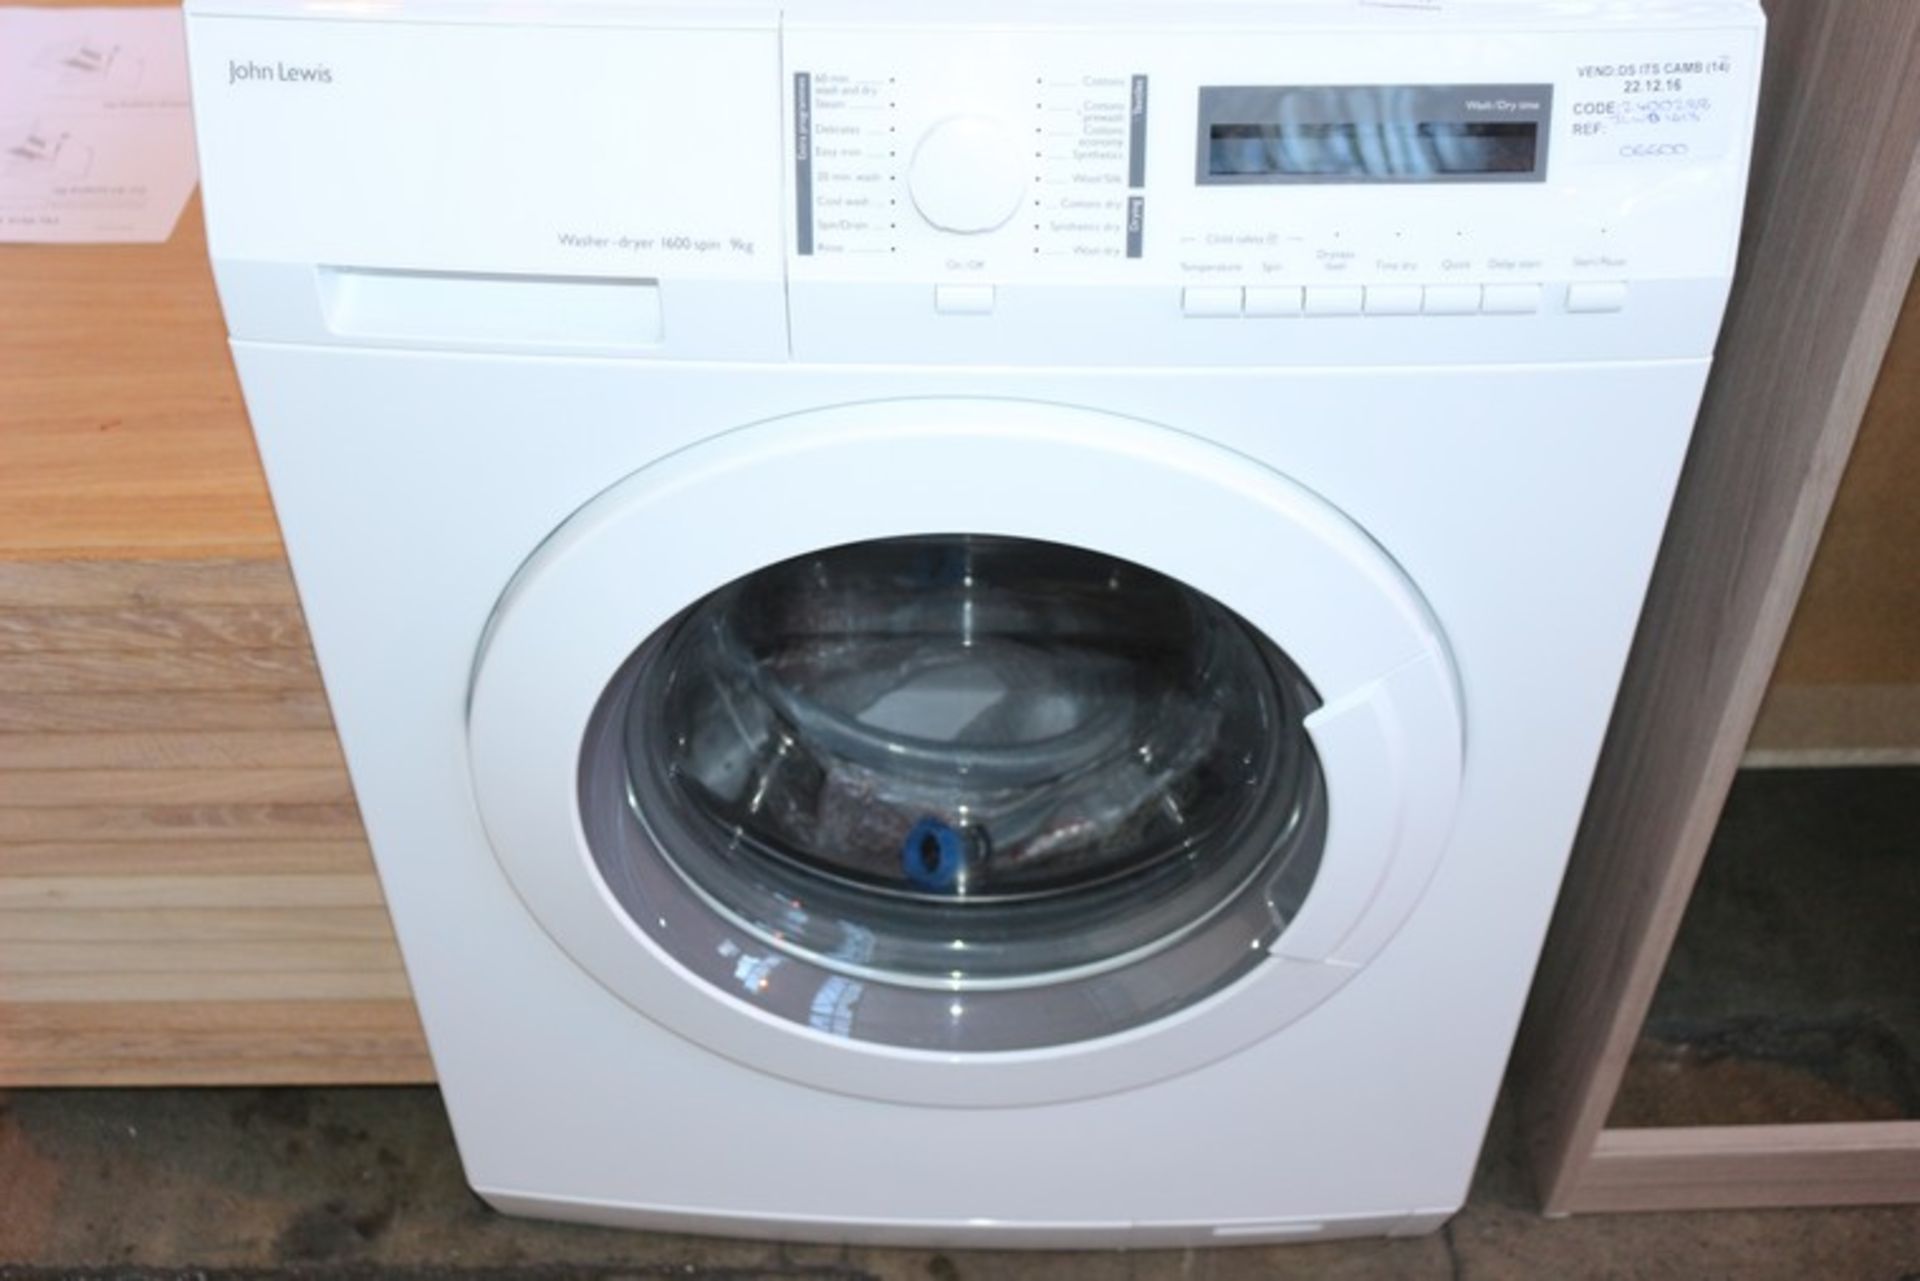 1 x 1600RPM 9KG DIGITAL DISPLAY UNDER THE COUNTER WASHER DRYER IN WHITE (2400288) RRP £660 (22.12.